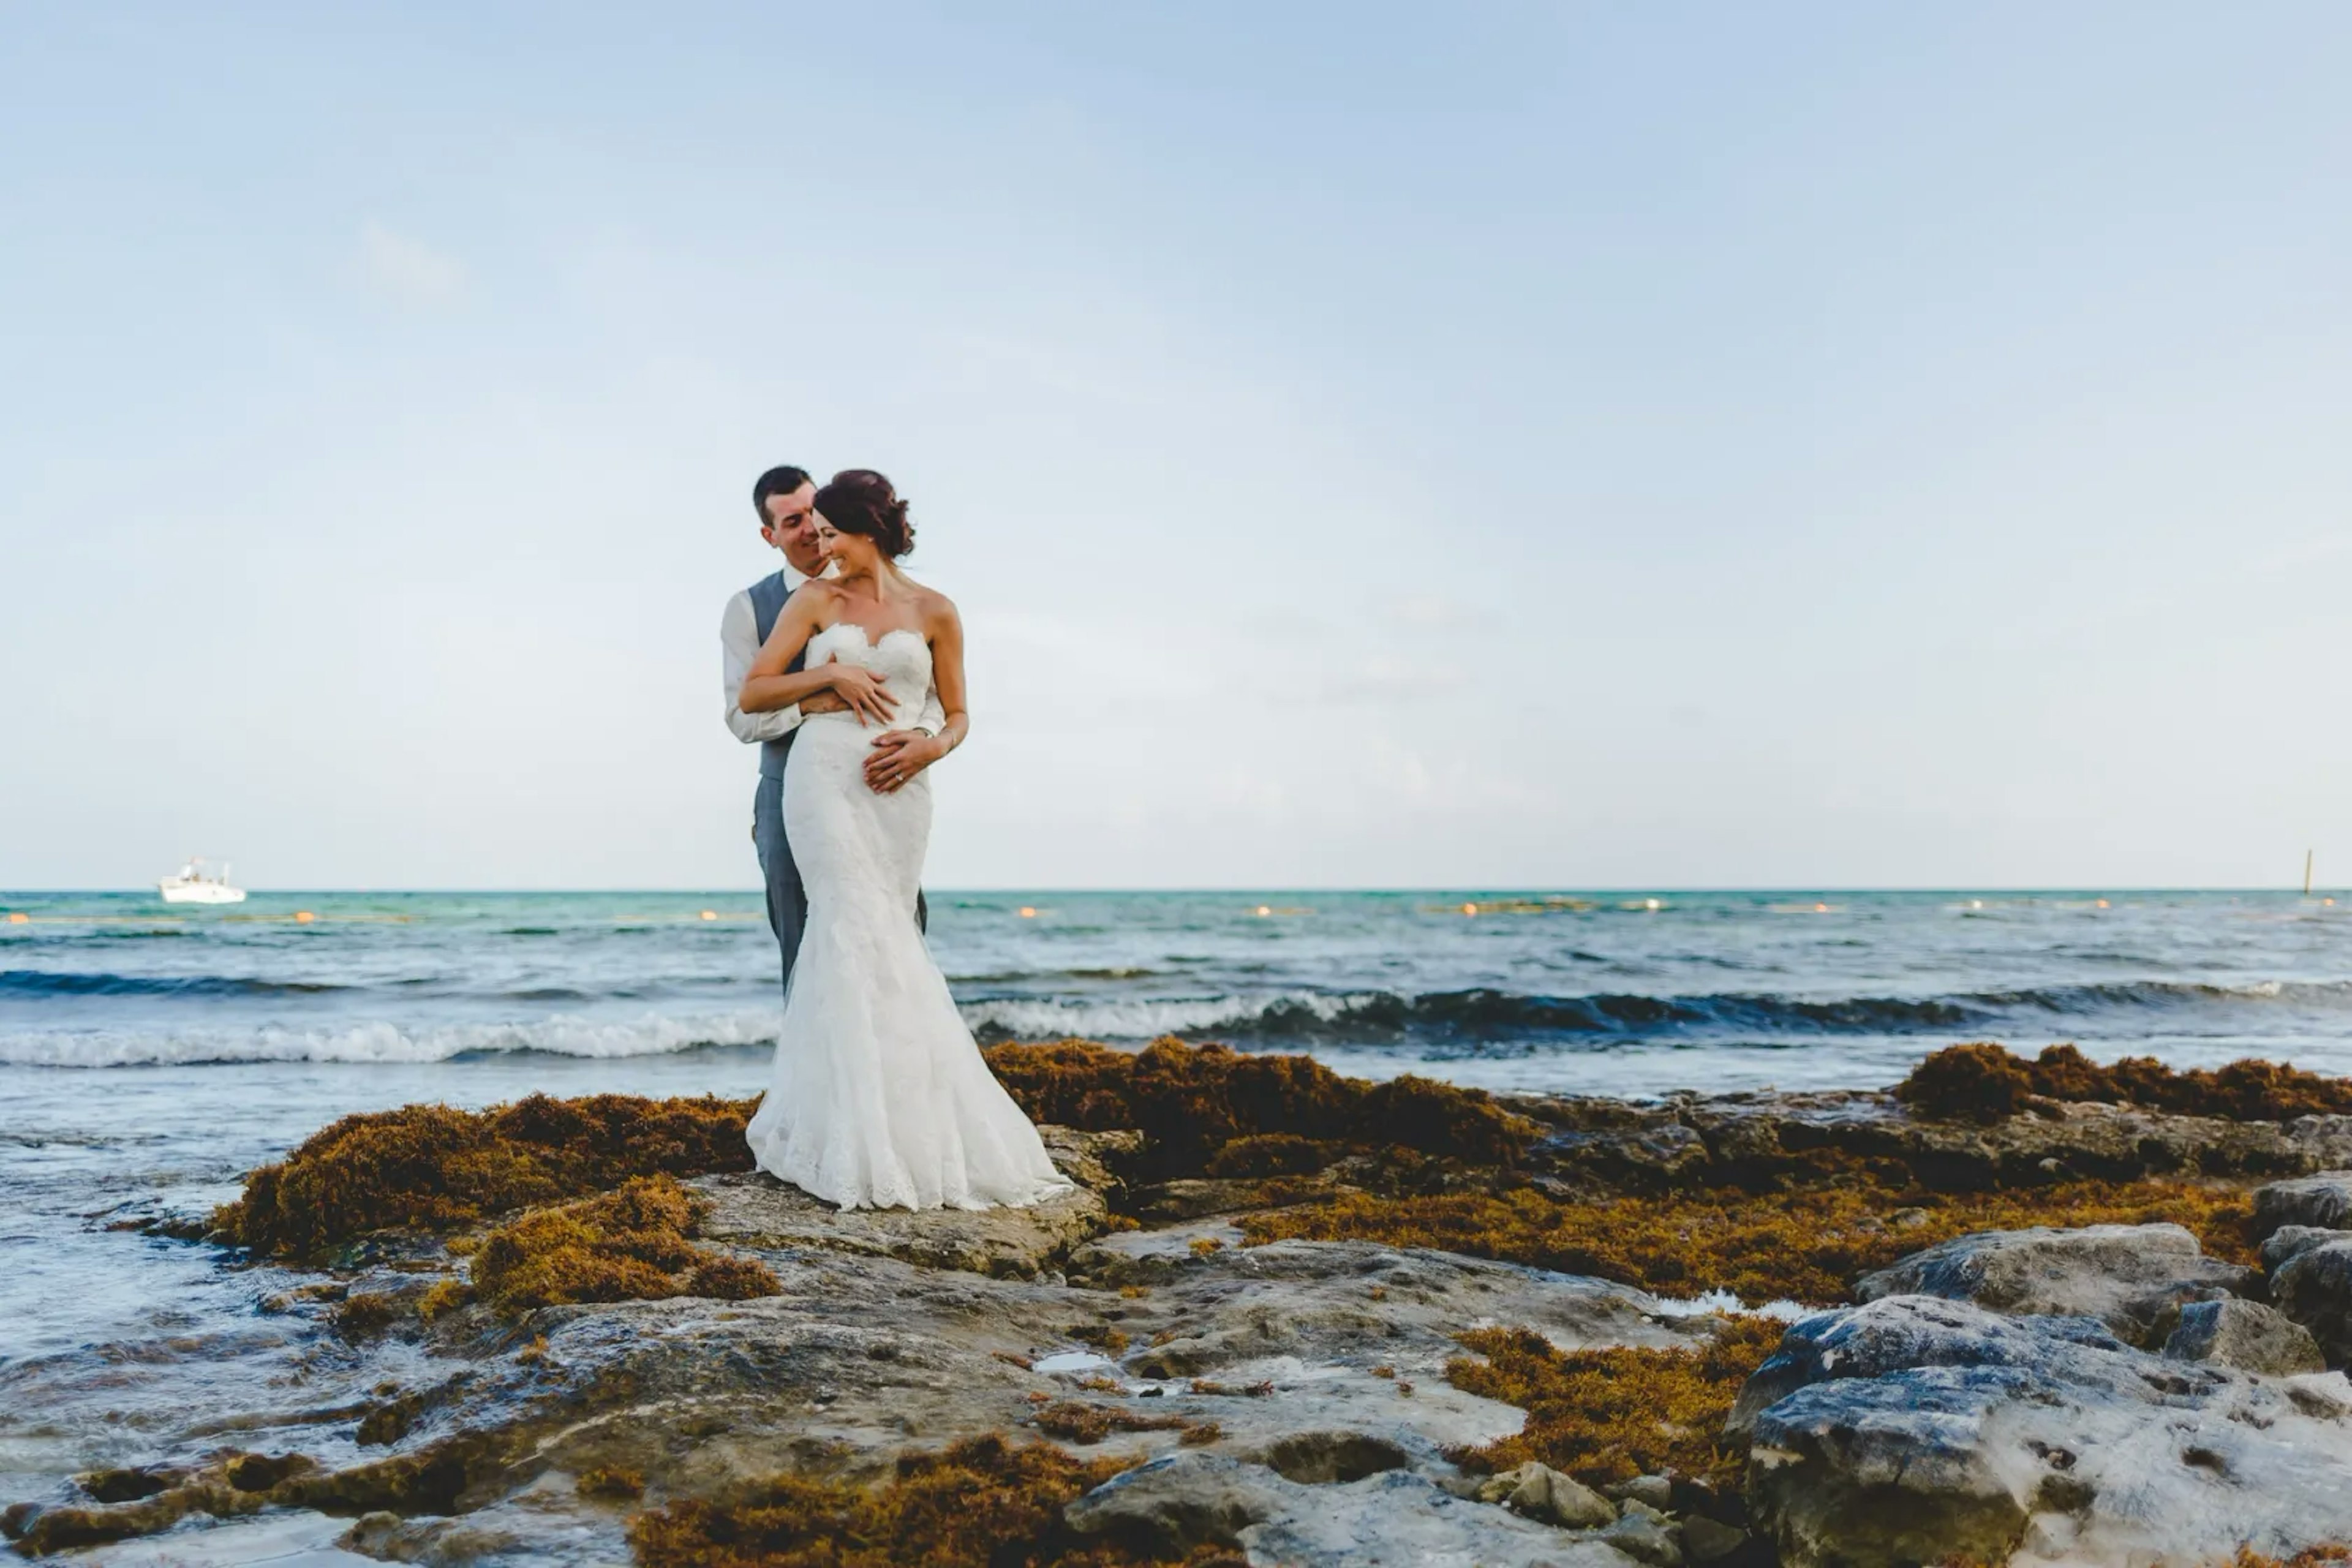 A bride and groom standing closely together on a rocky shore, with the ocean behind them and a boat visible in the distance under a clear sky.